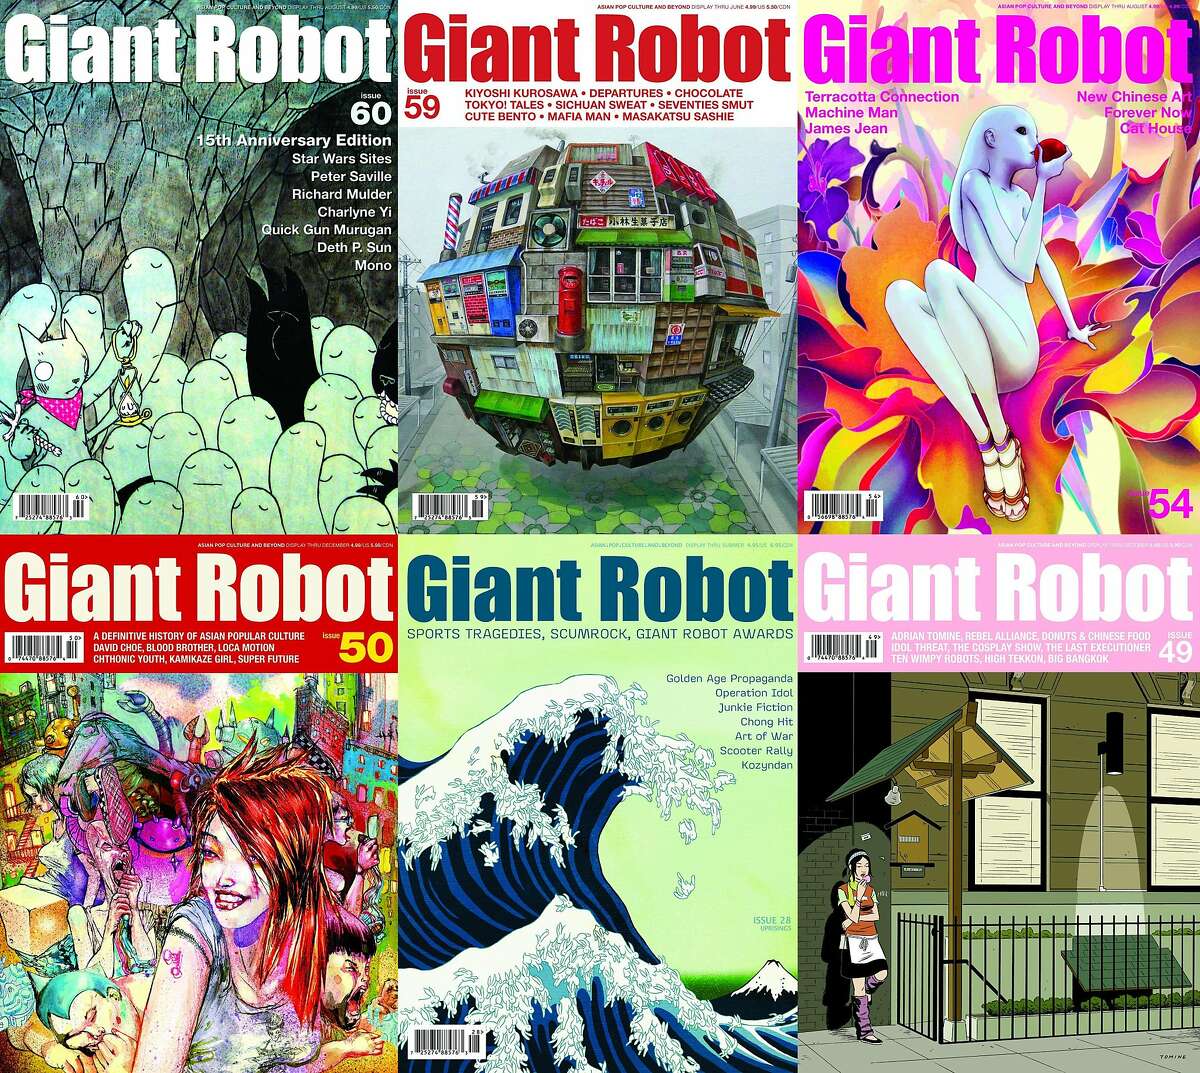 Giant Robot magazine covers; issue 60 by Deth P. Sun; issue 59 by Masatasku Sashie; issue 54 by James Jean; issue 50 by David Choe; issue 28 by kozyndan; issue 49 by Adrian Tomine